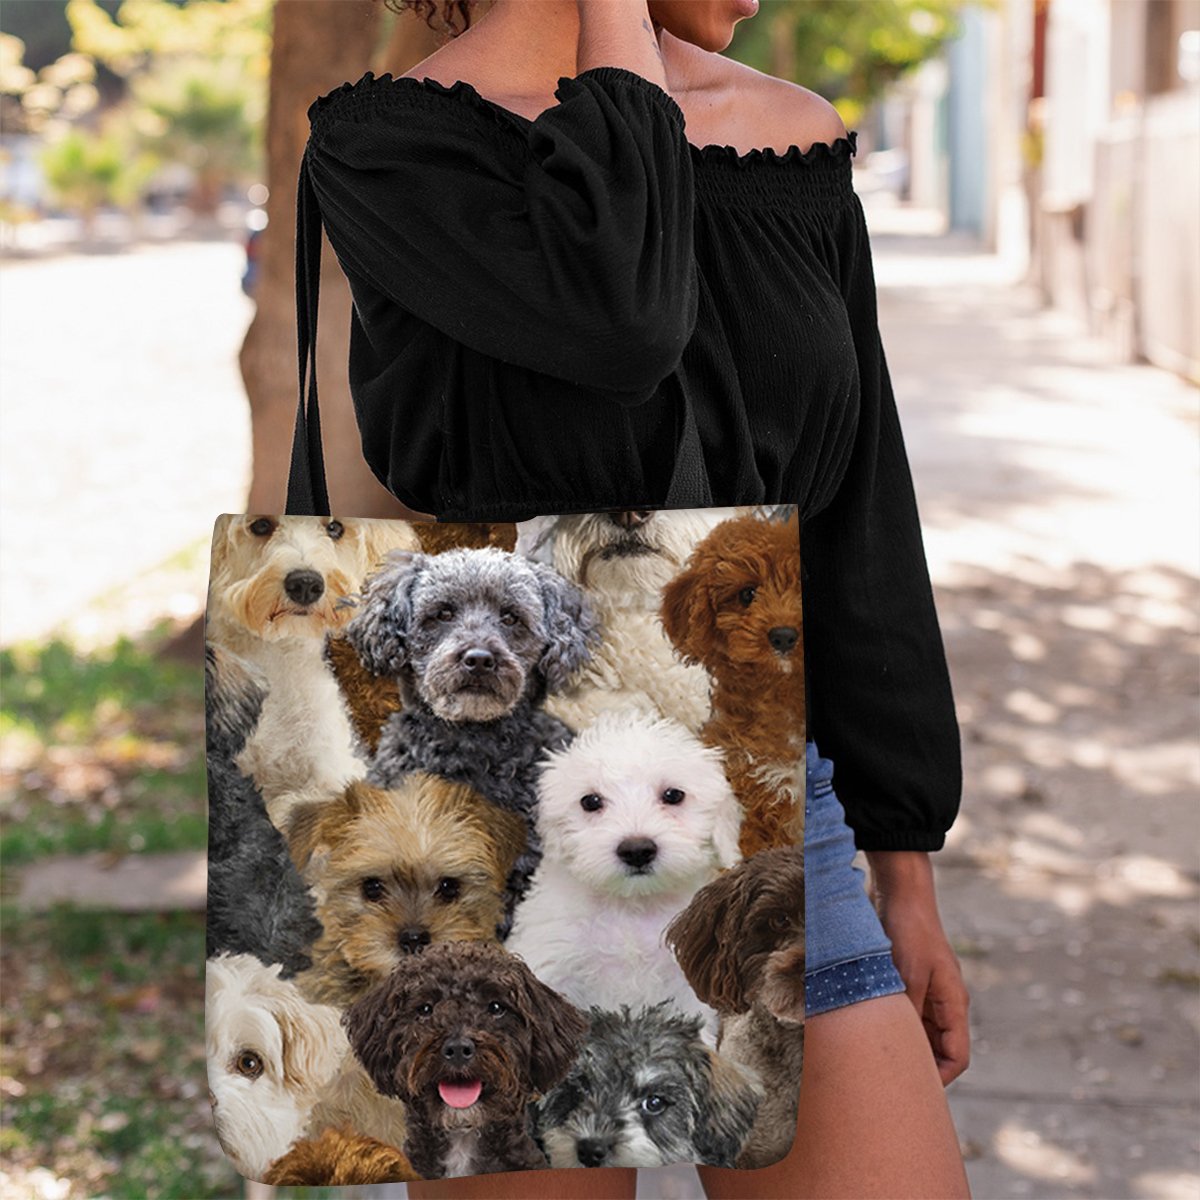 A Bunch Of Schnoodles Tote Bag